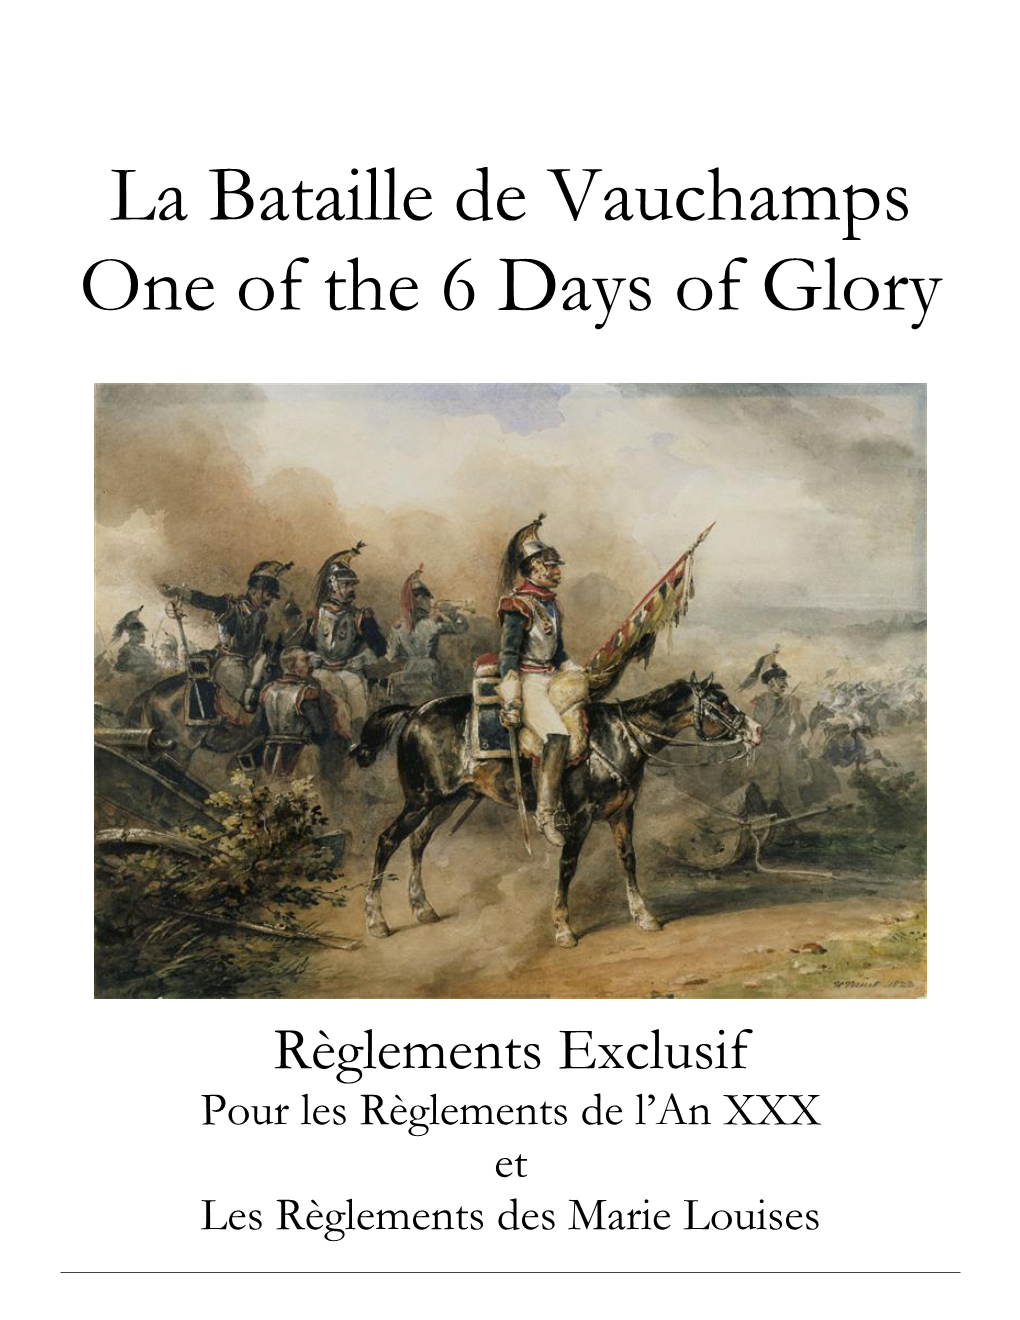 La Bataille De Vauchamps One of the 6 Days of Glory